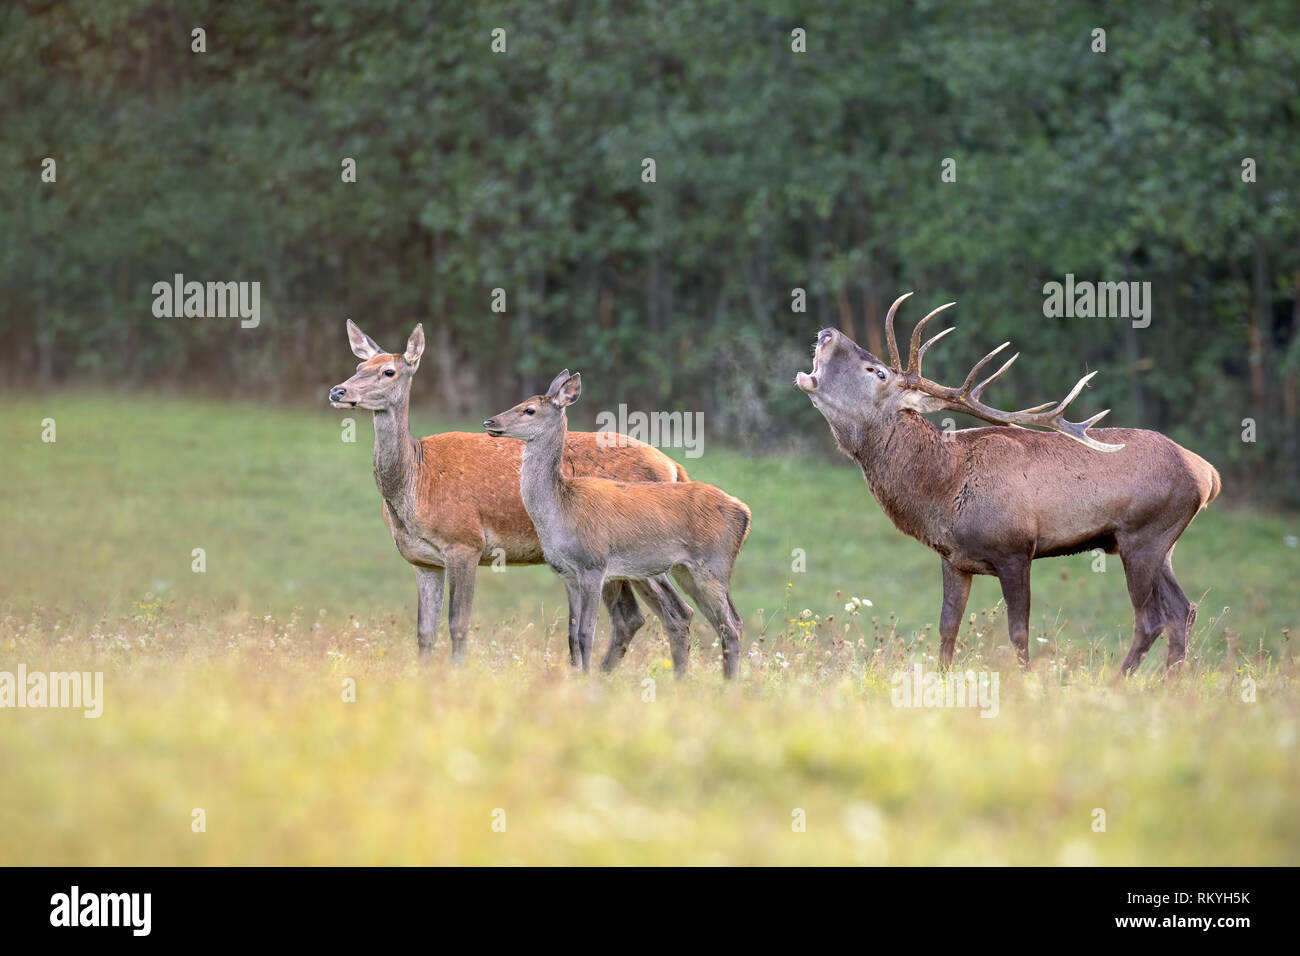 Red deer, cervus elaphus, herd in rutting season with stag bellowing. Animal family in nature. Group of wild mammals in wilderness in mating season. Stock Photo